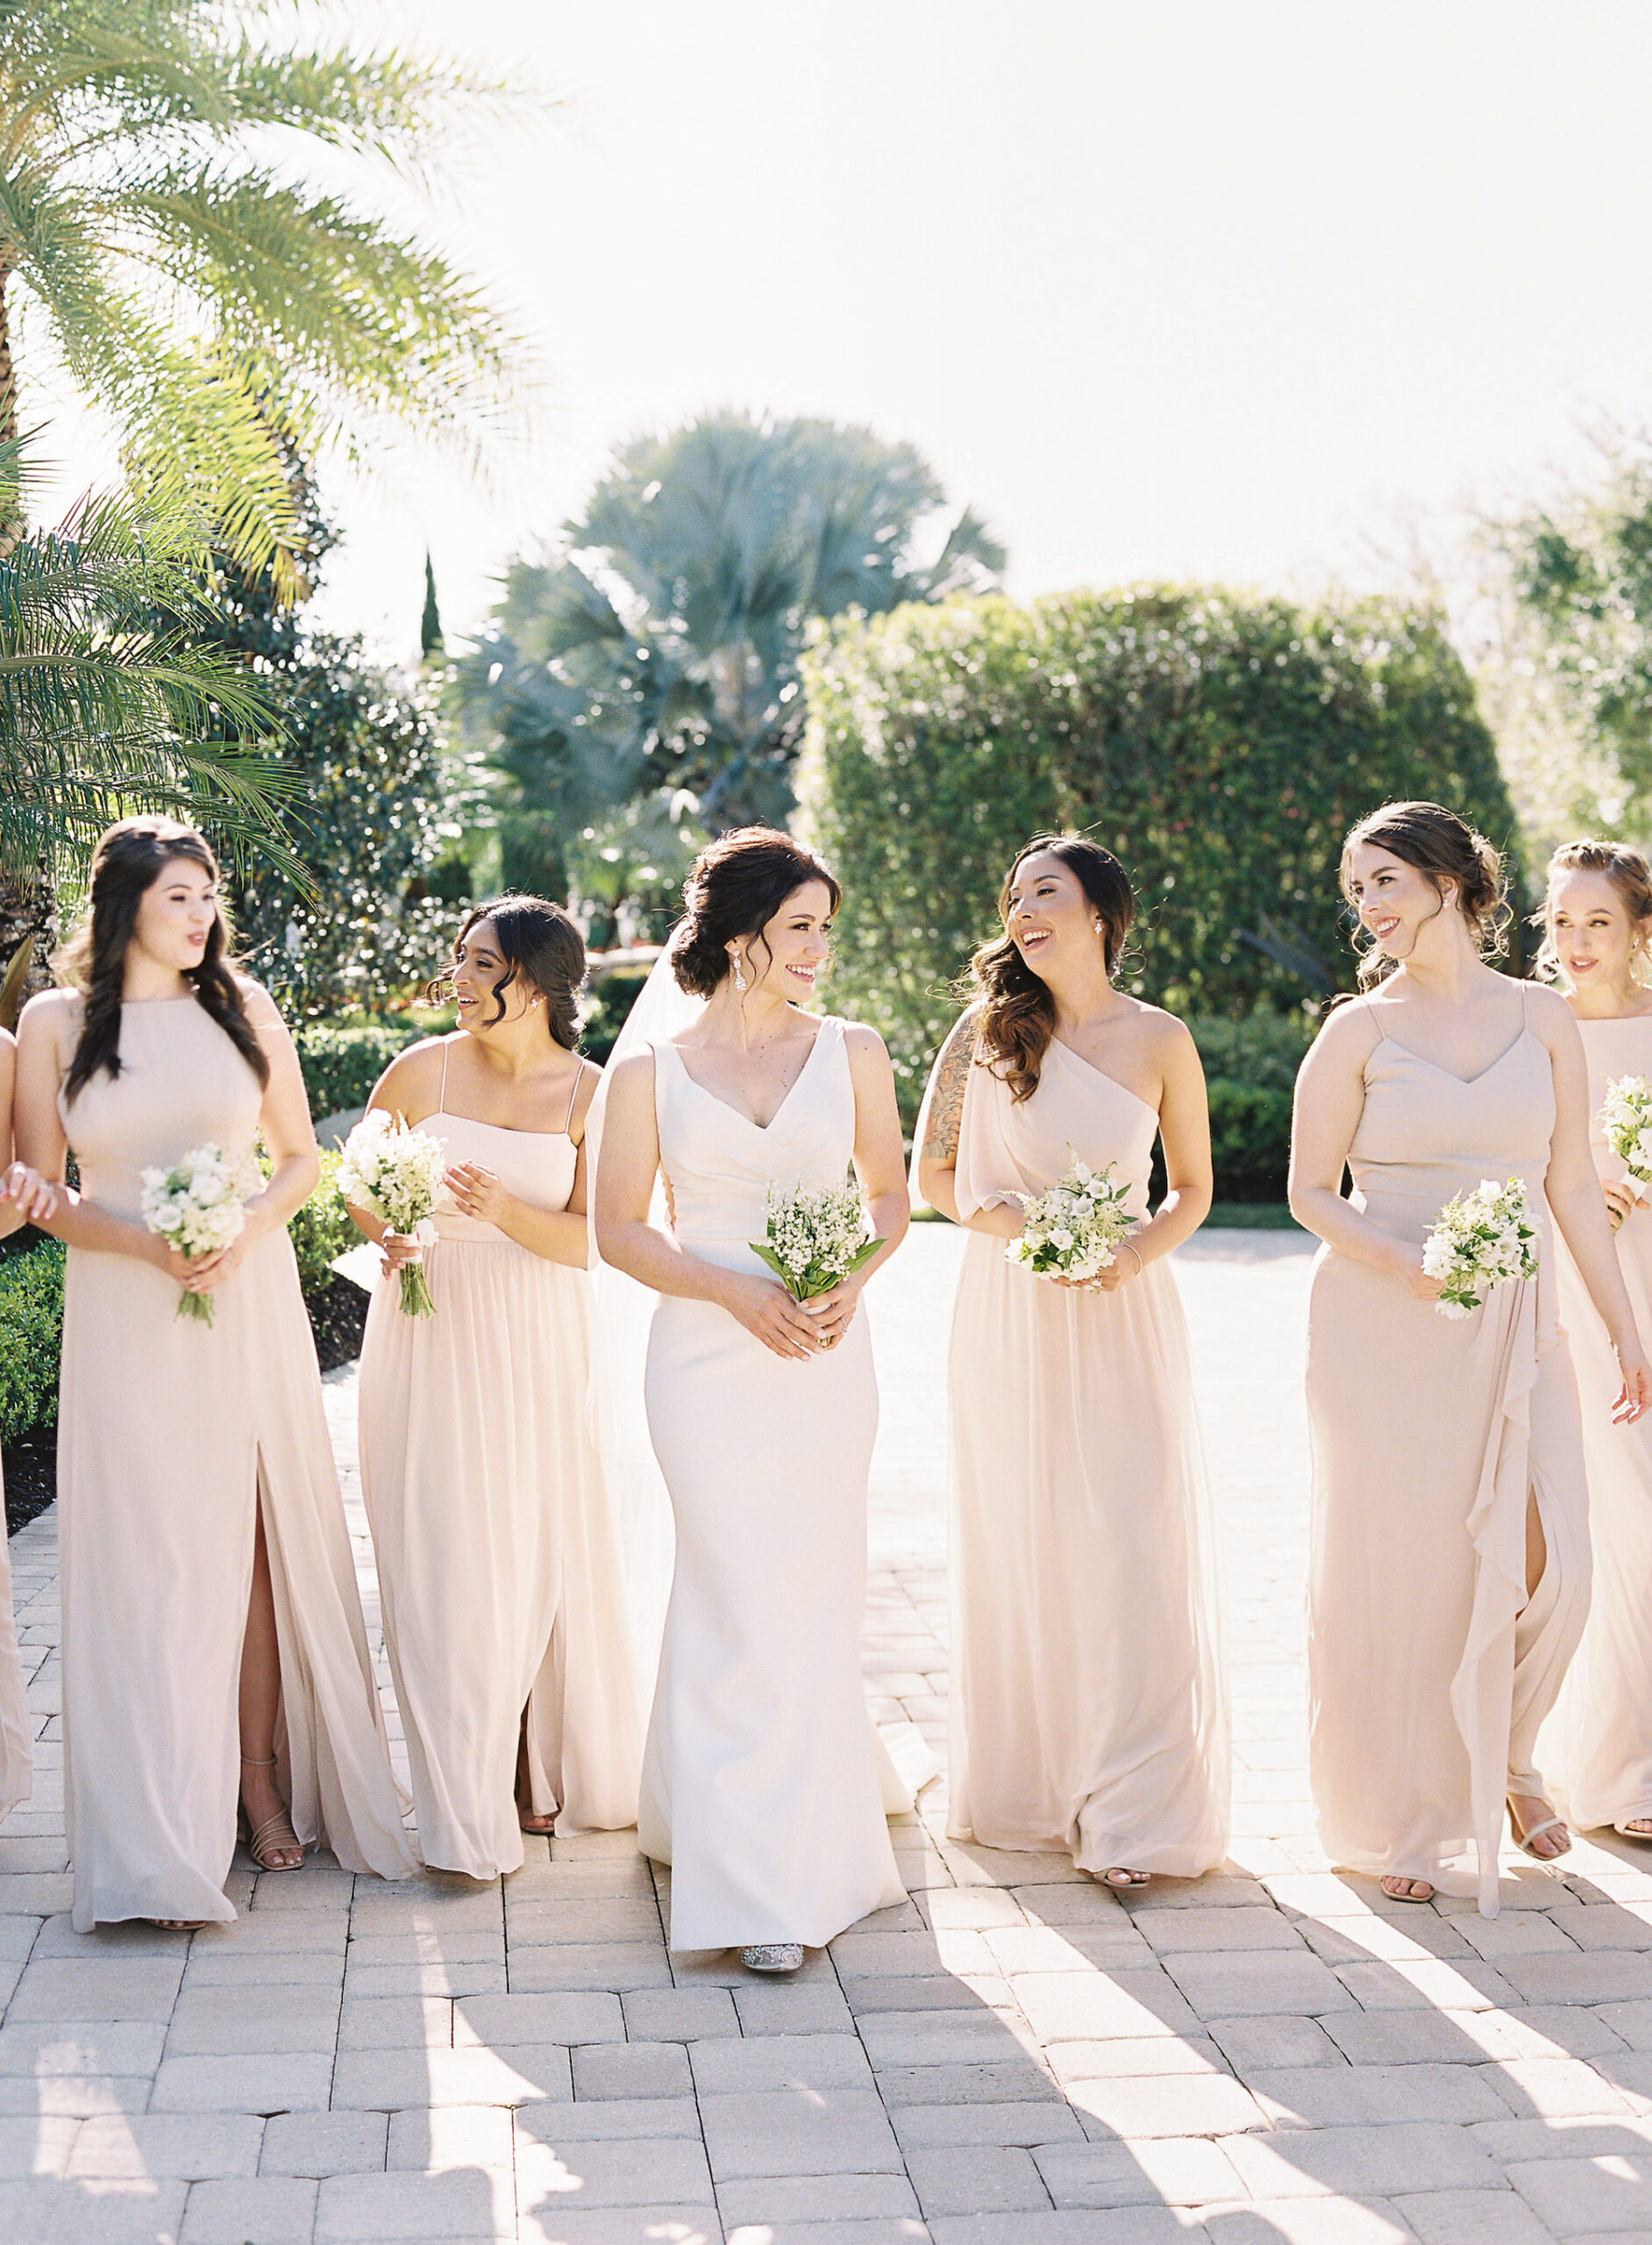 Old Florida Elegant Classic Bride with Bridesmaids in Mix and Match Nude Champagne Dresses | Tampa Bay Wedding Bridesmaid Dresses Bella Bridesmaids